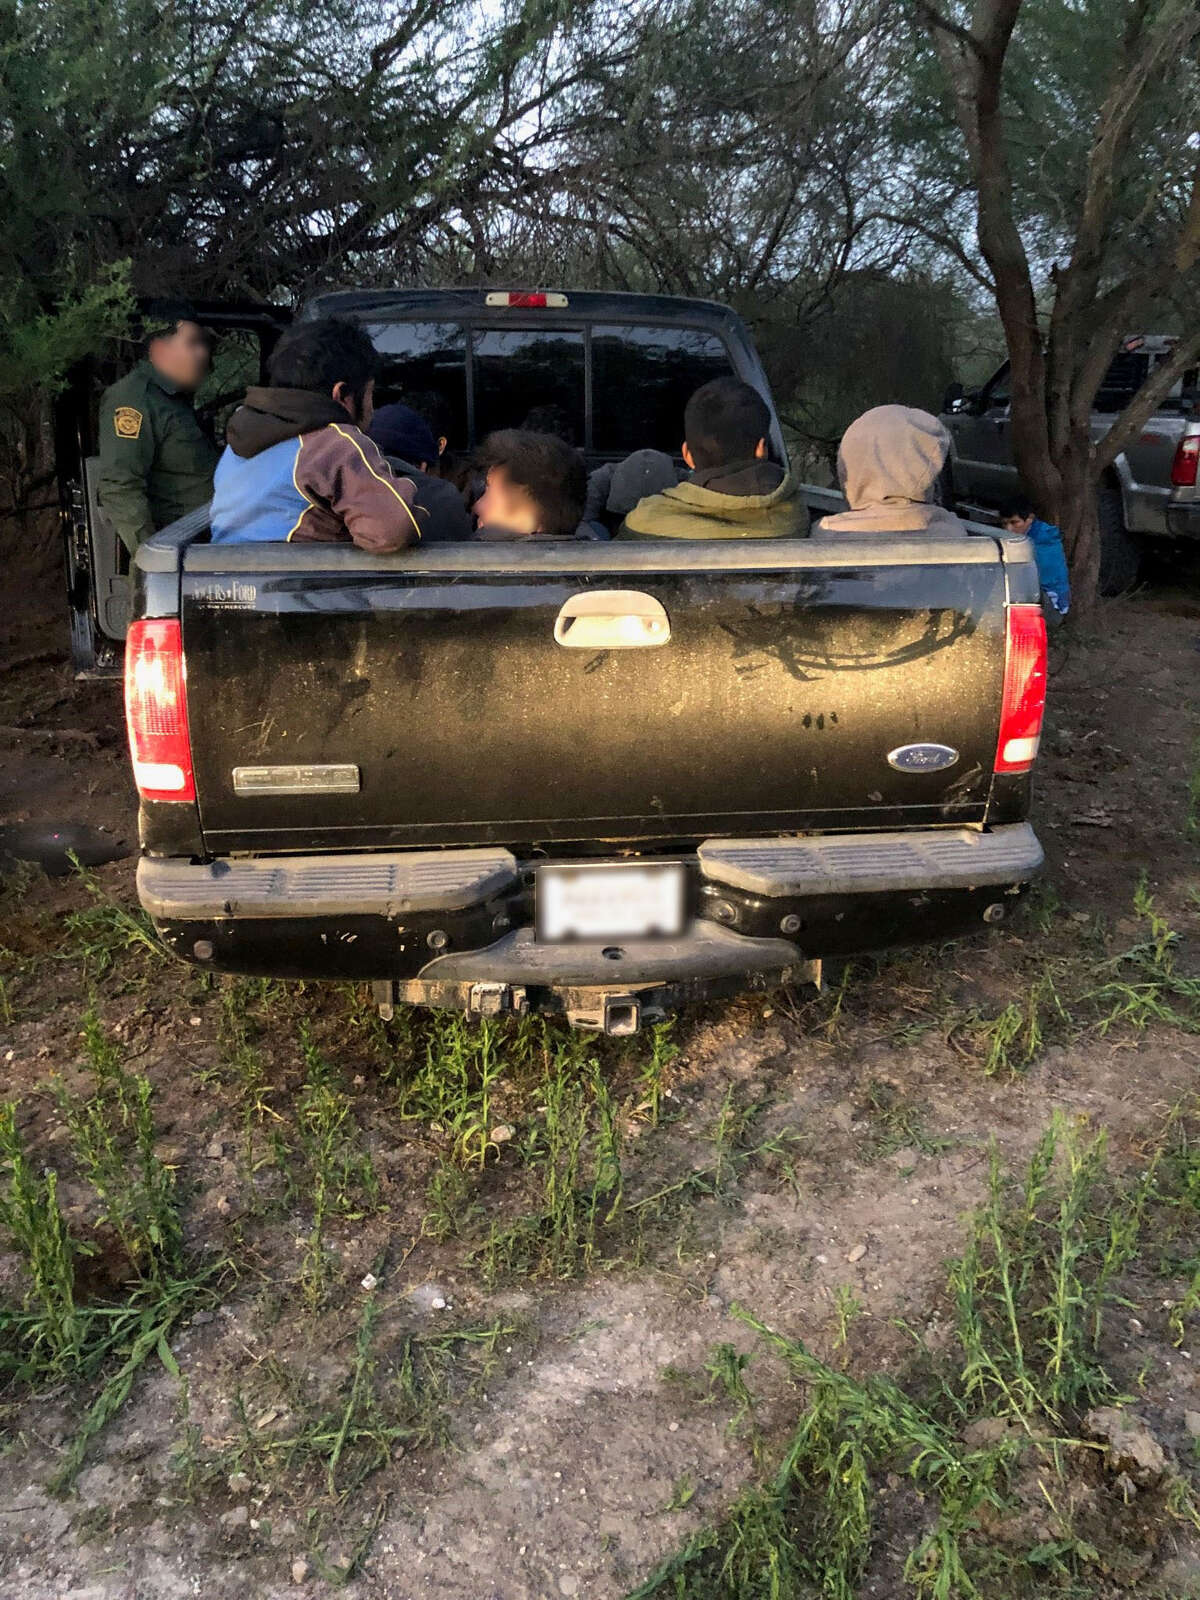 Shown is one of the pickup trucks used in the attempted smuggling attempt of 57 migrants.